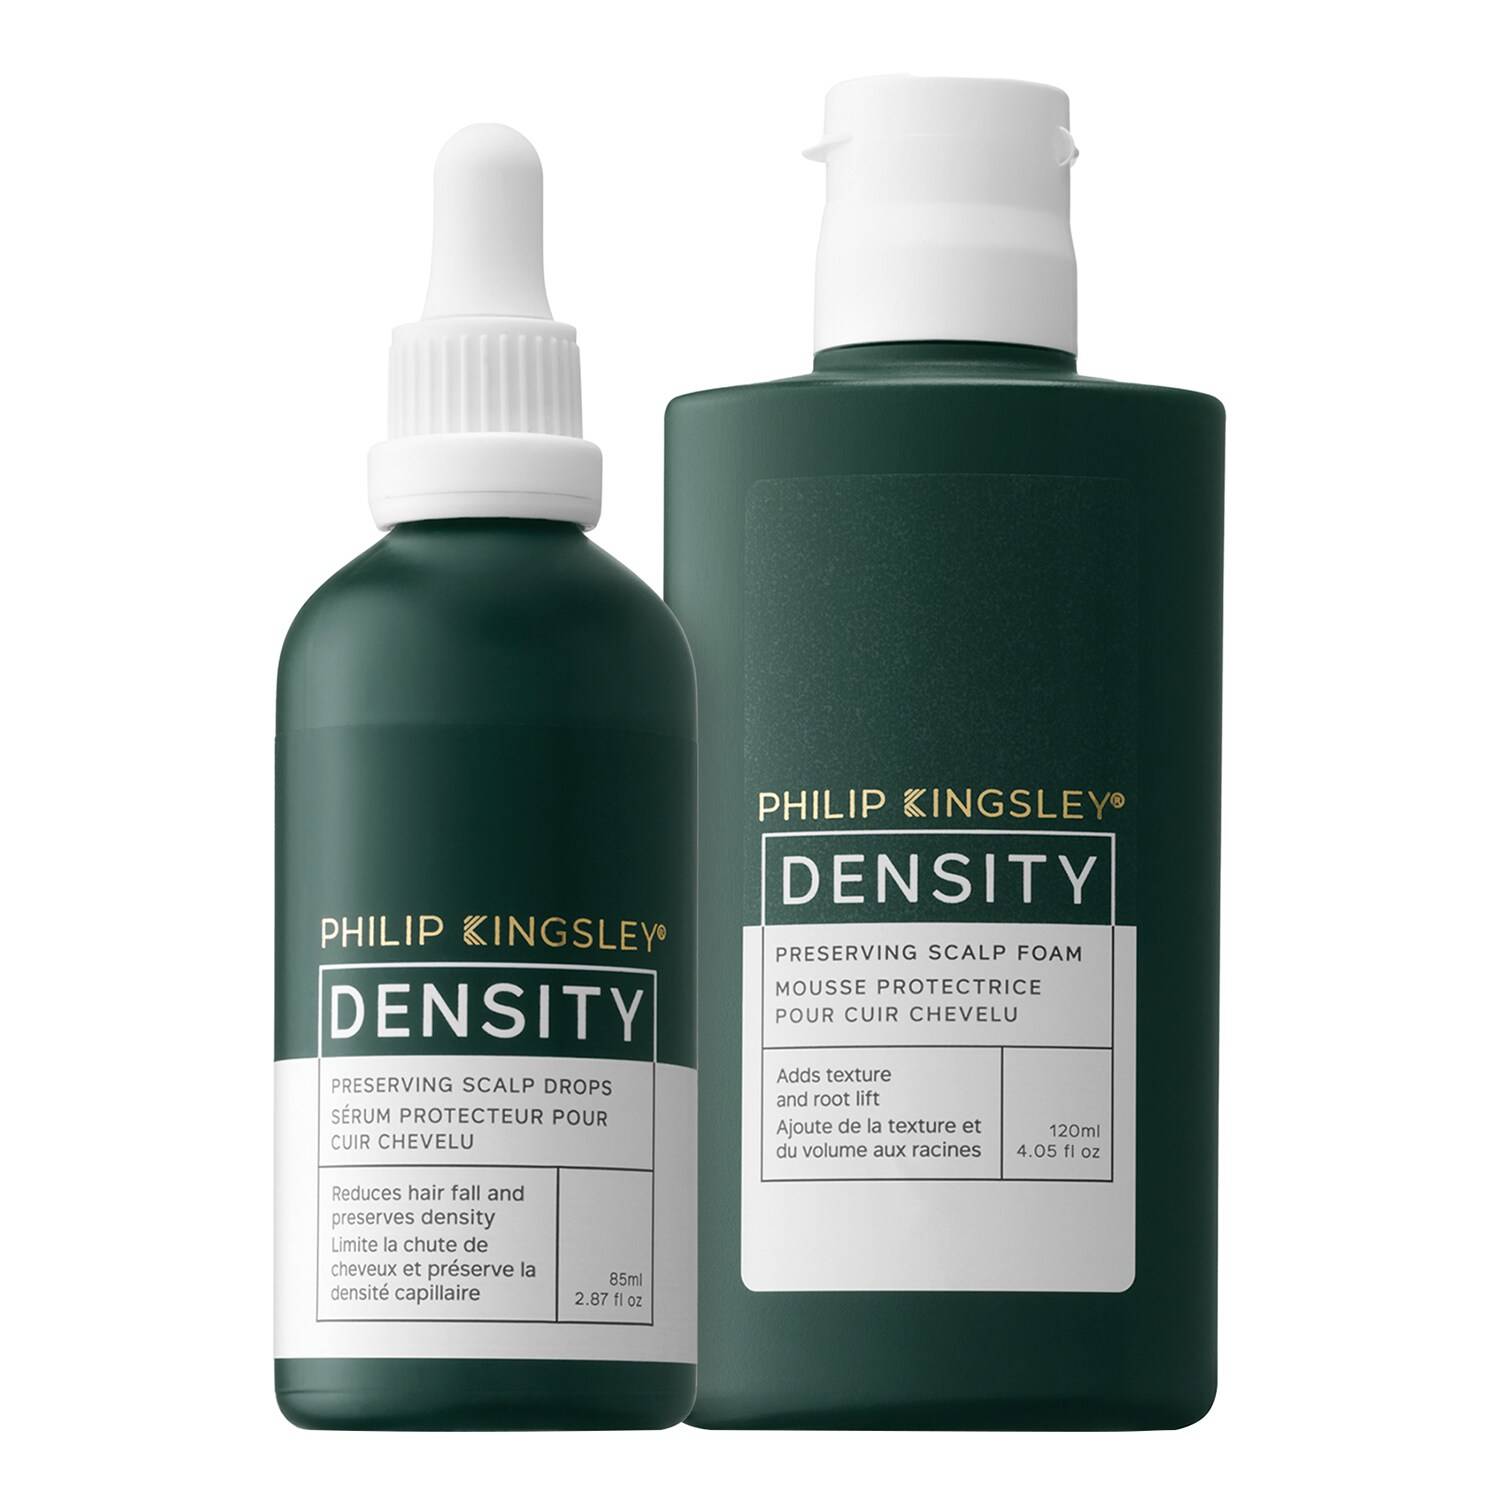 PHILIP KINGSLEY Density Hair and Scalp Preserving Collection